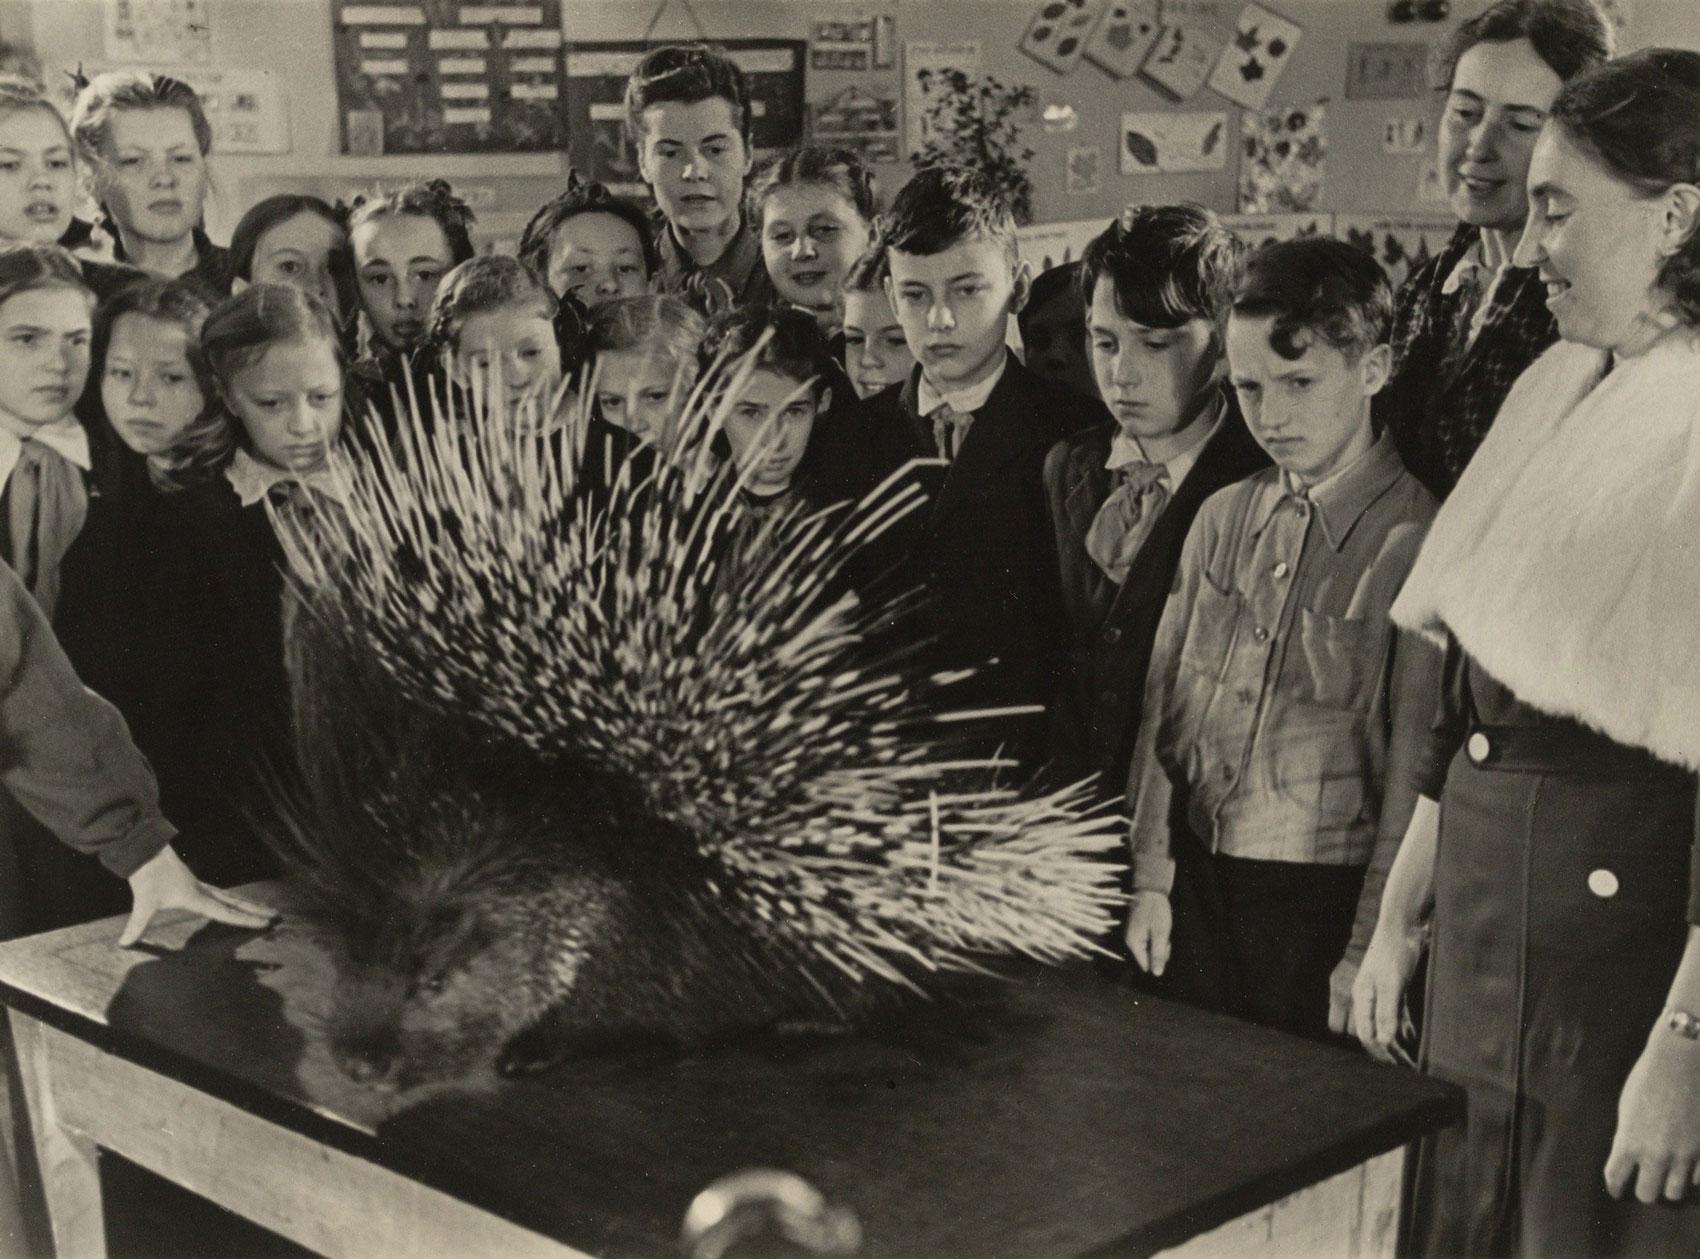 A group of schoolkids and teachers admire a porcupine in their classroom.